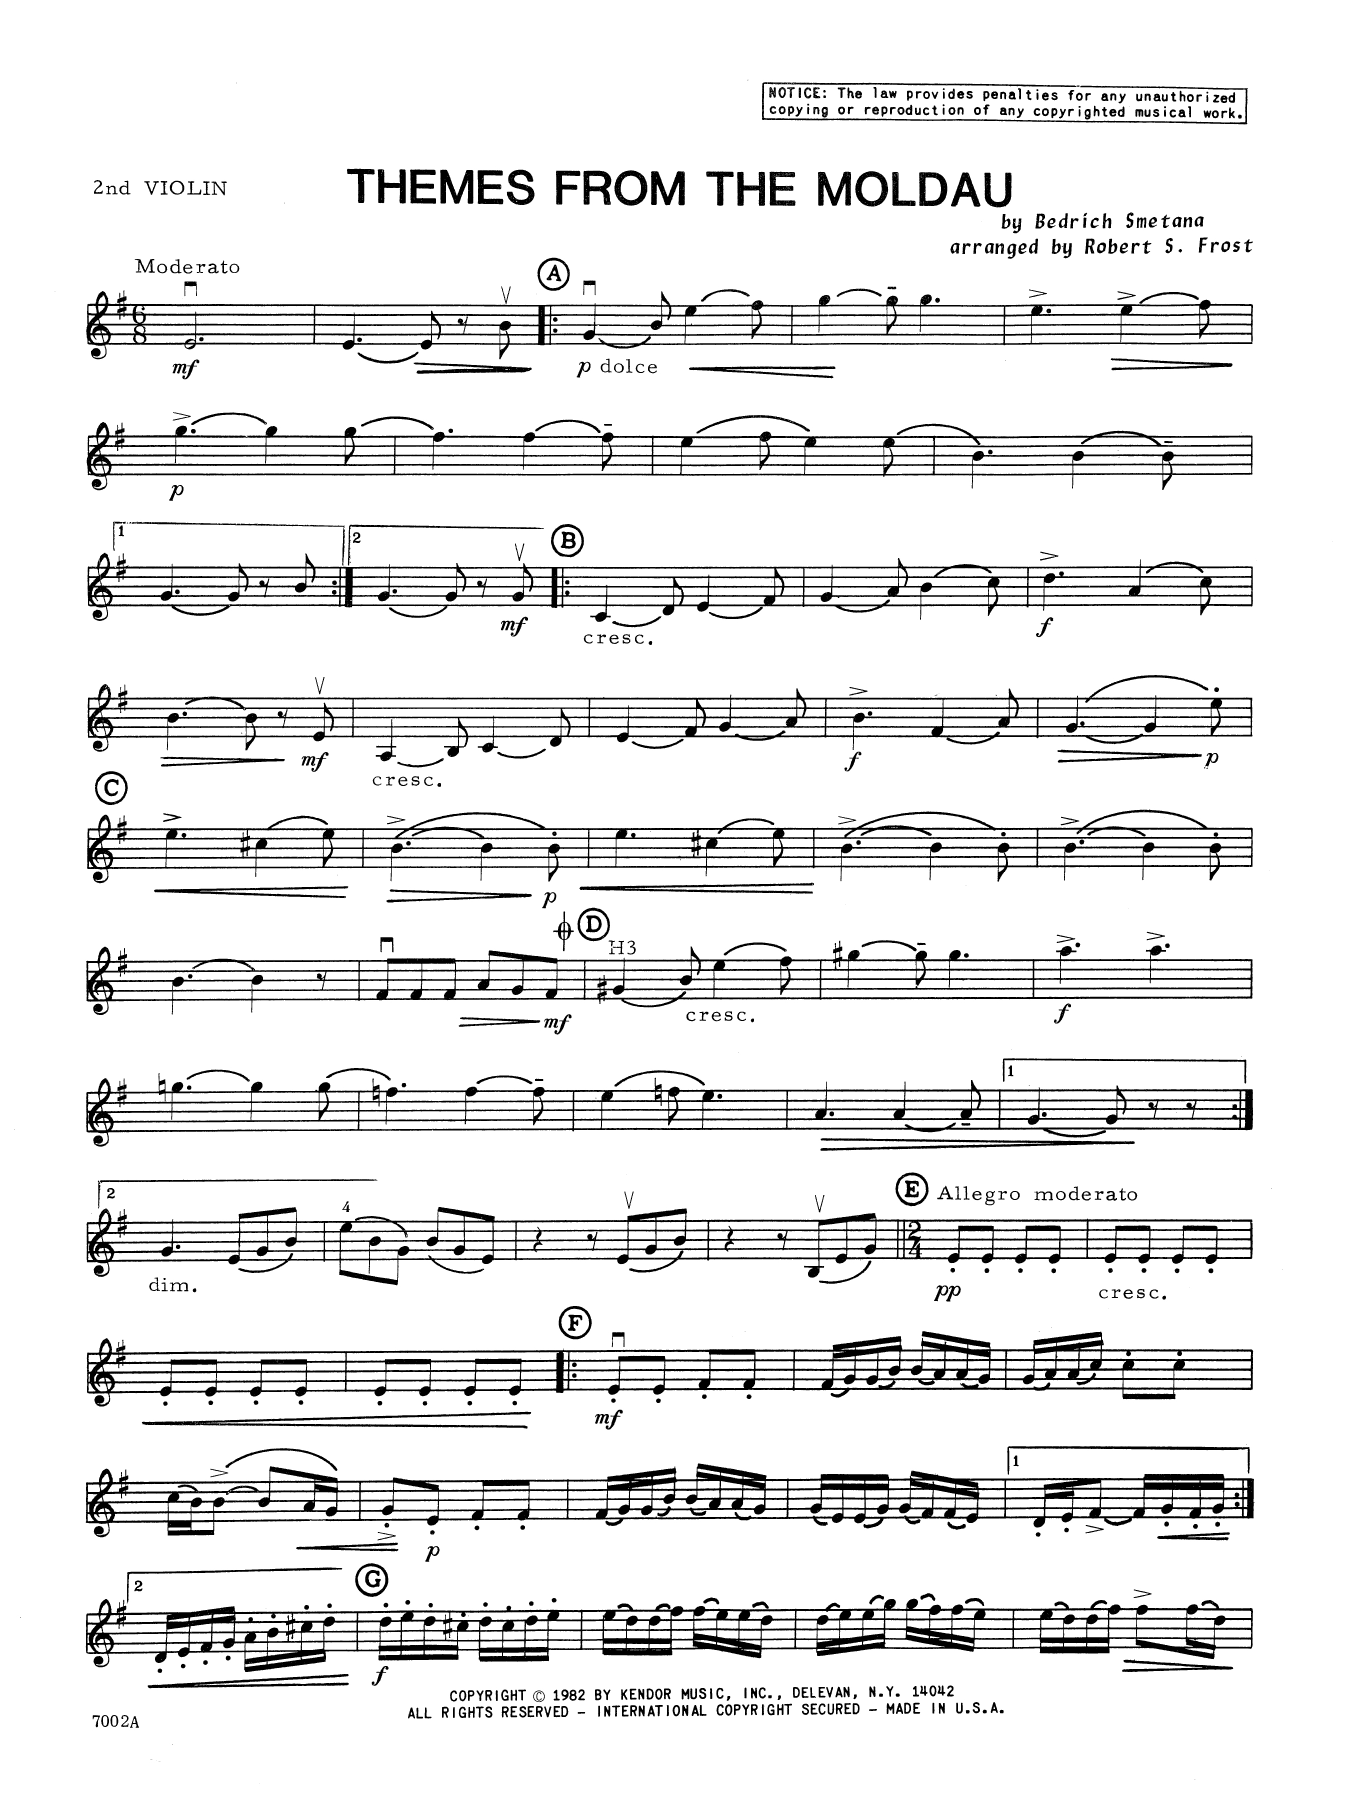 Download Robert S. Frost Themes From The Moldau - 2nd Violin Sheet Music